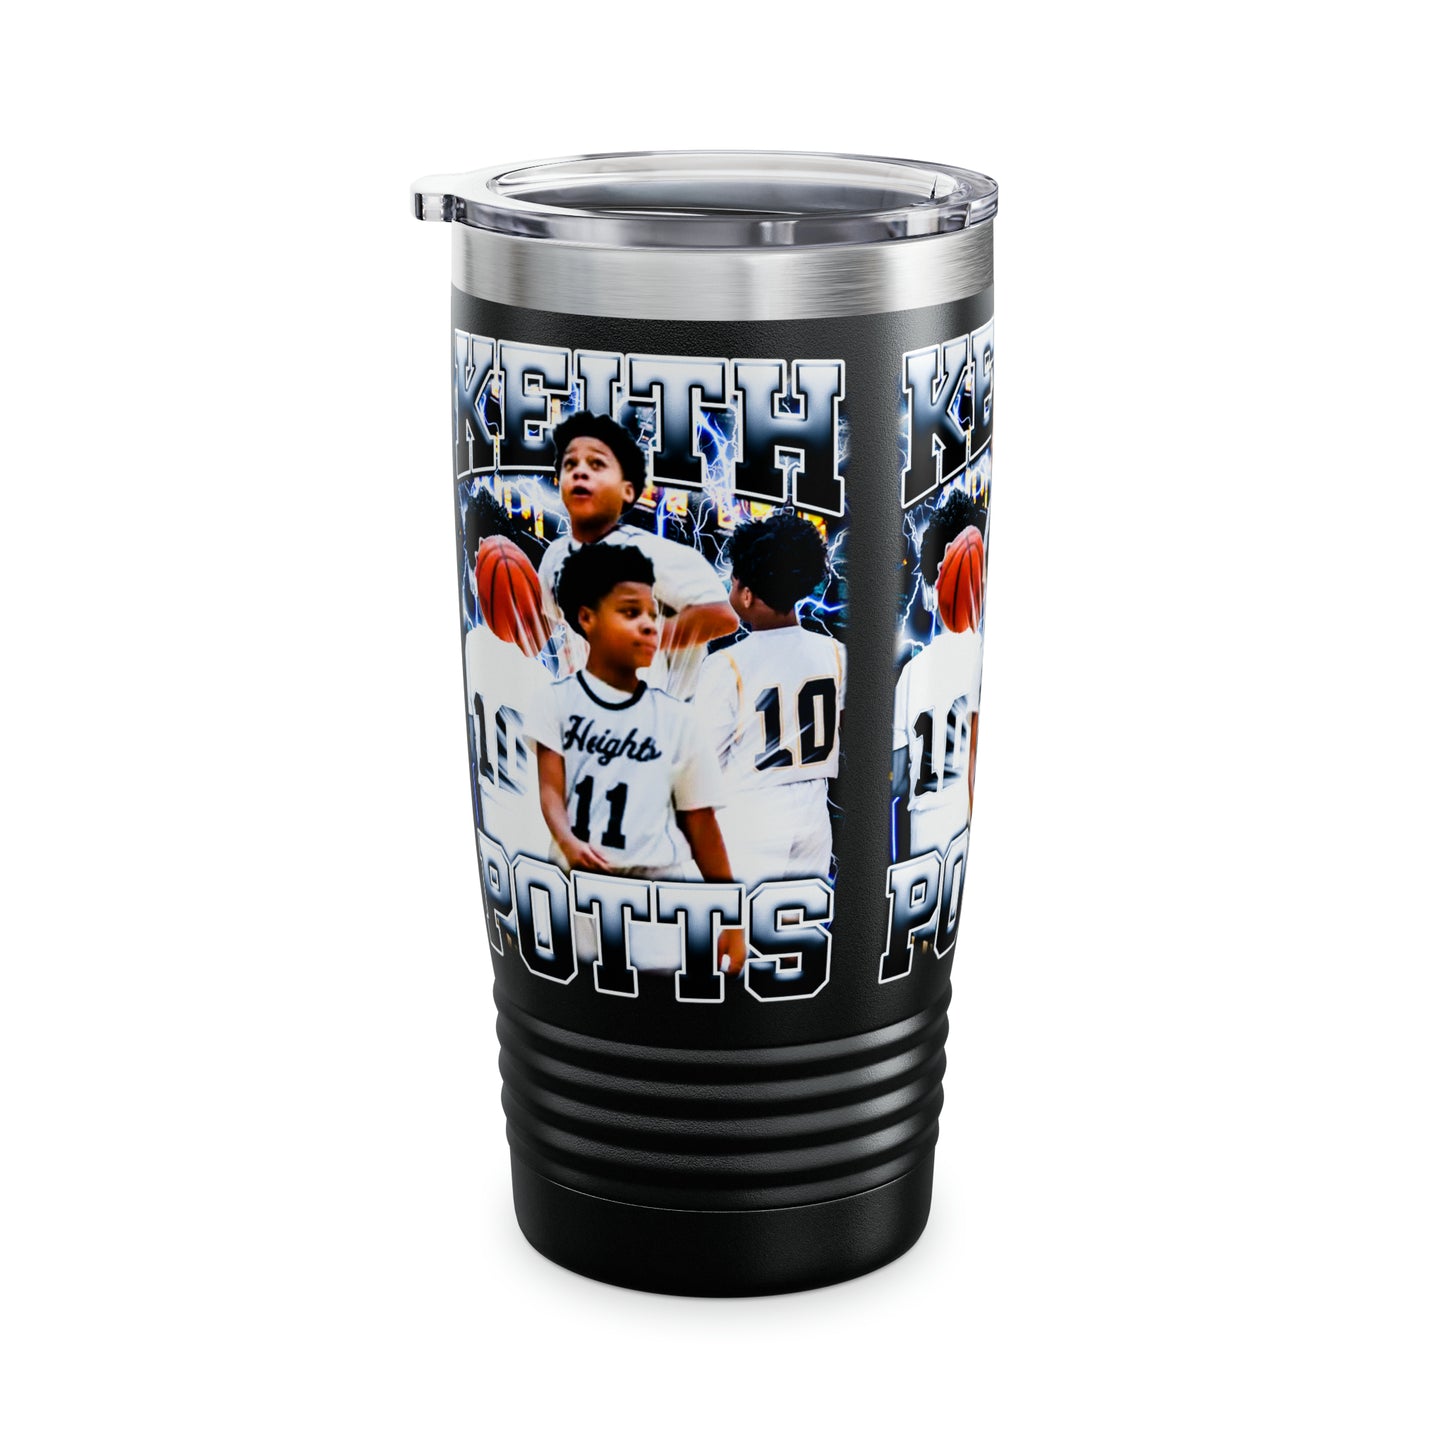 Keith Potts Stainless Steel Tumbler